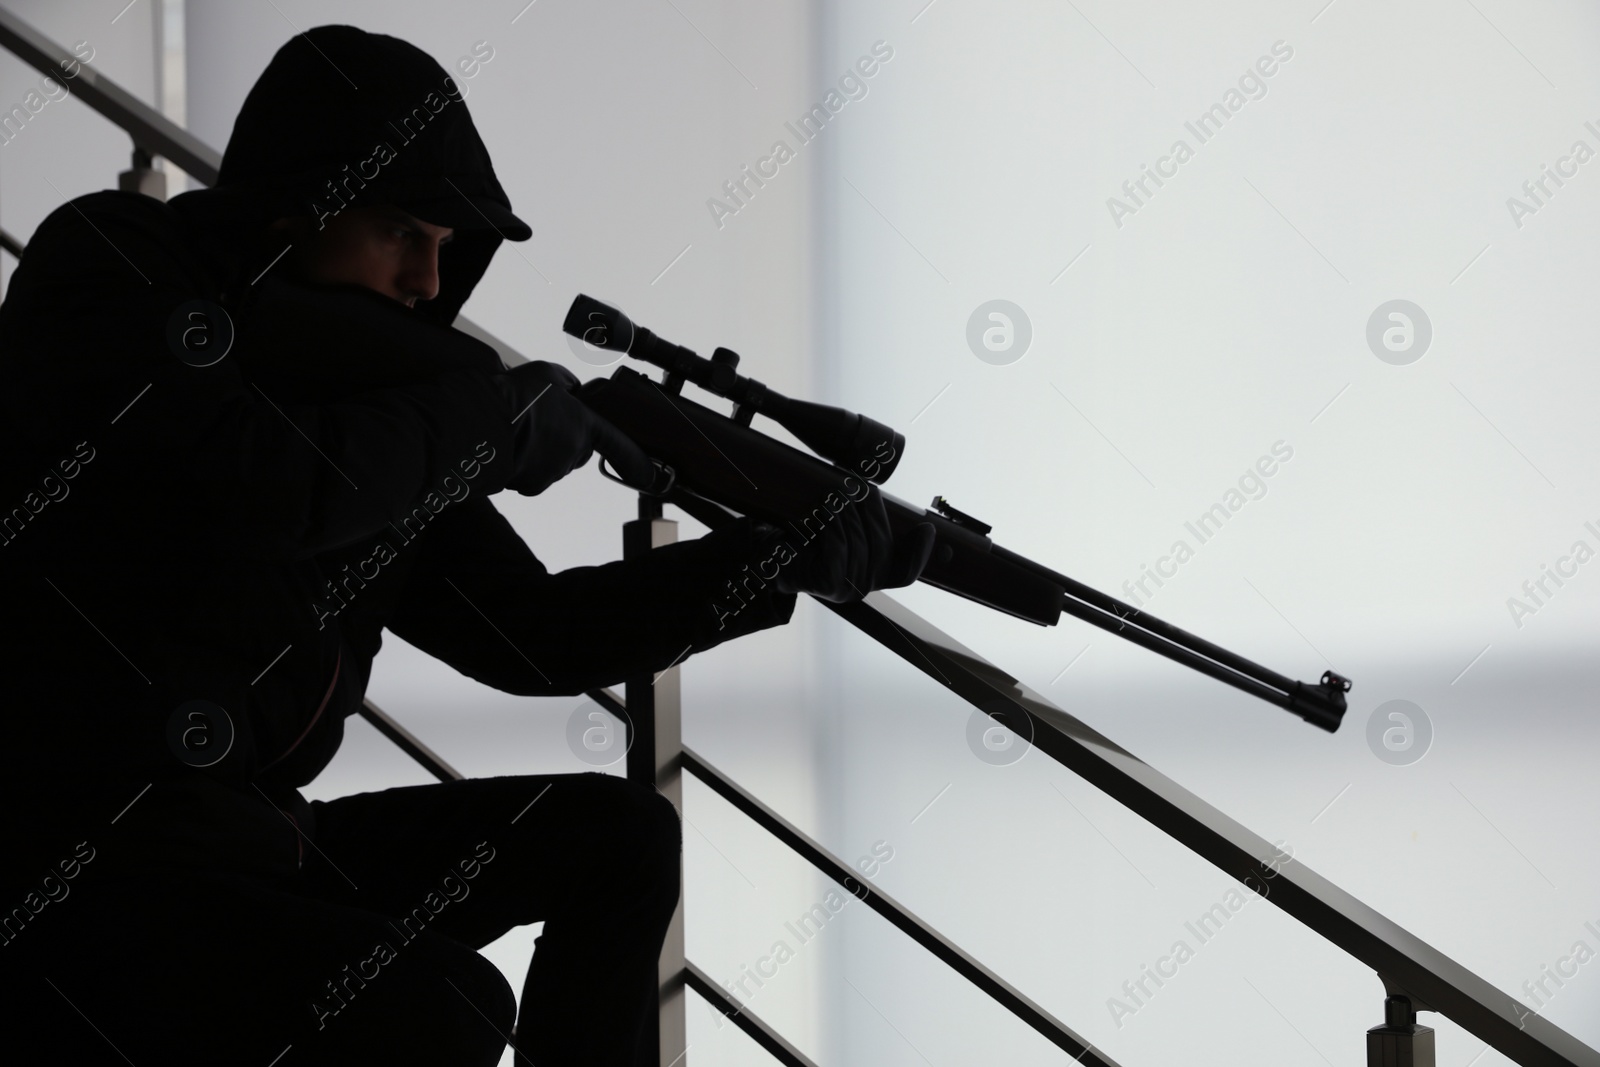 Photo of Hired professional killer with sniper rifle indoors